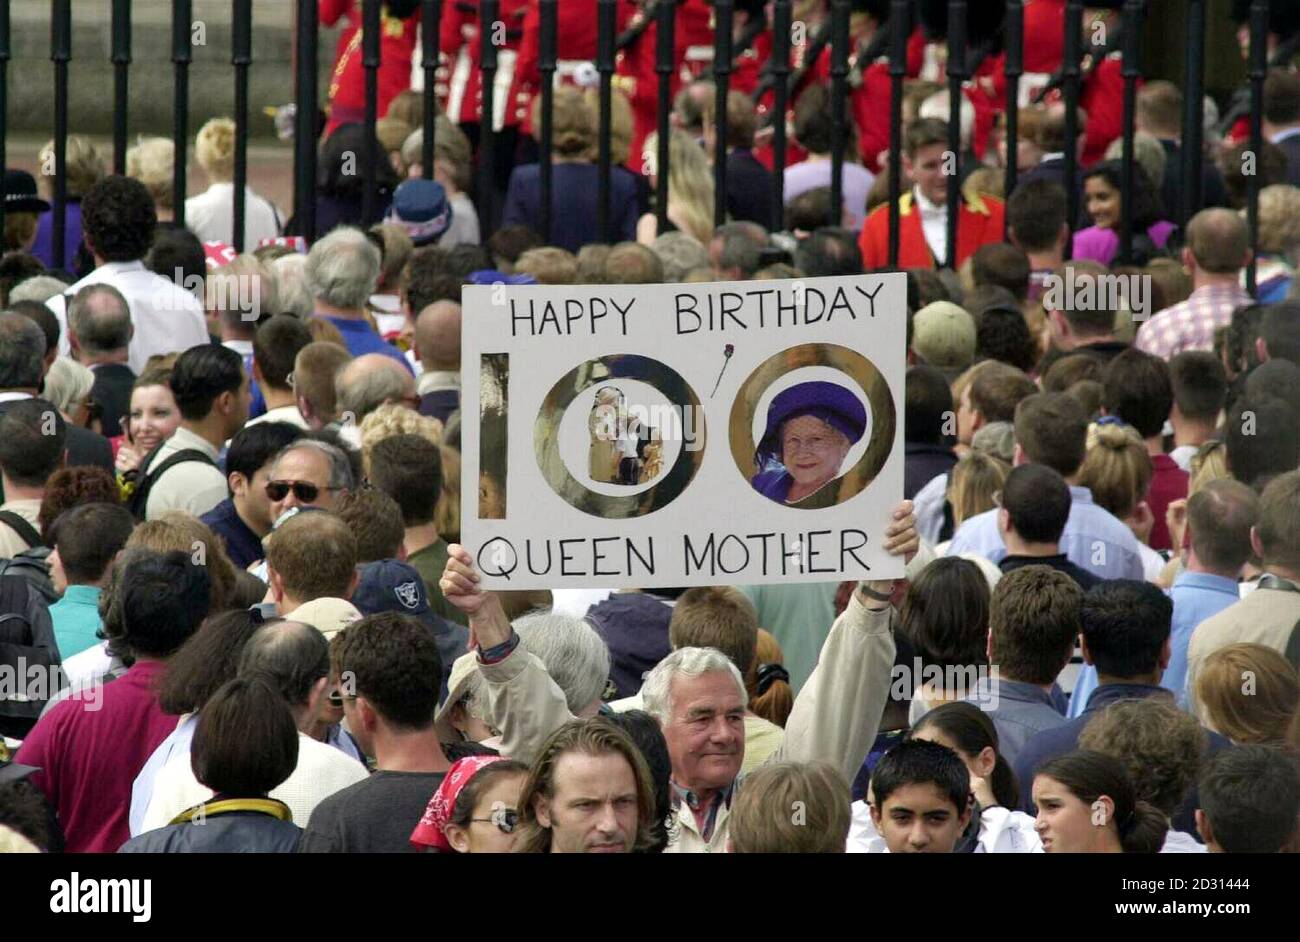 Crowds gather outside Buckingham Palace in London, waiting for the Queen Mother to appear on the Balcony during her 100th Birthday celebrations. Stock Photo